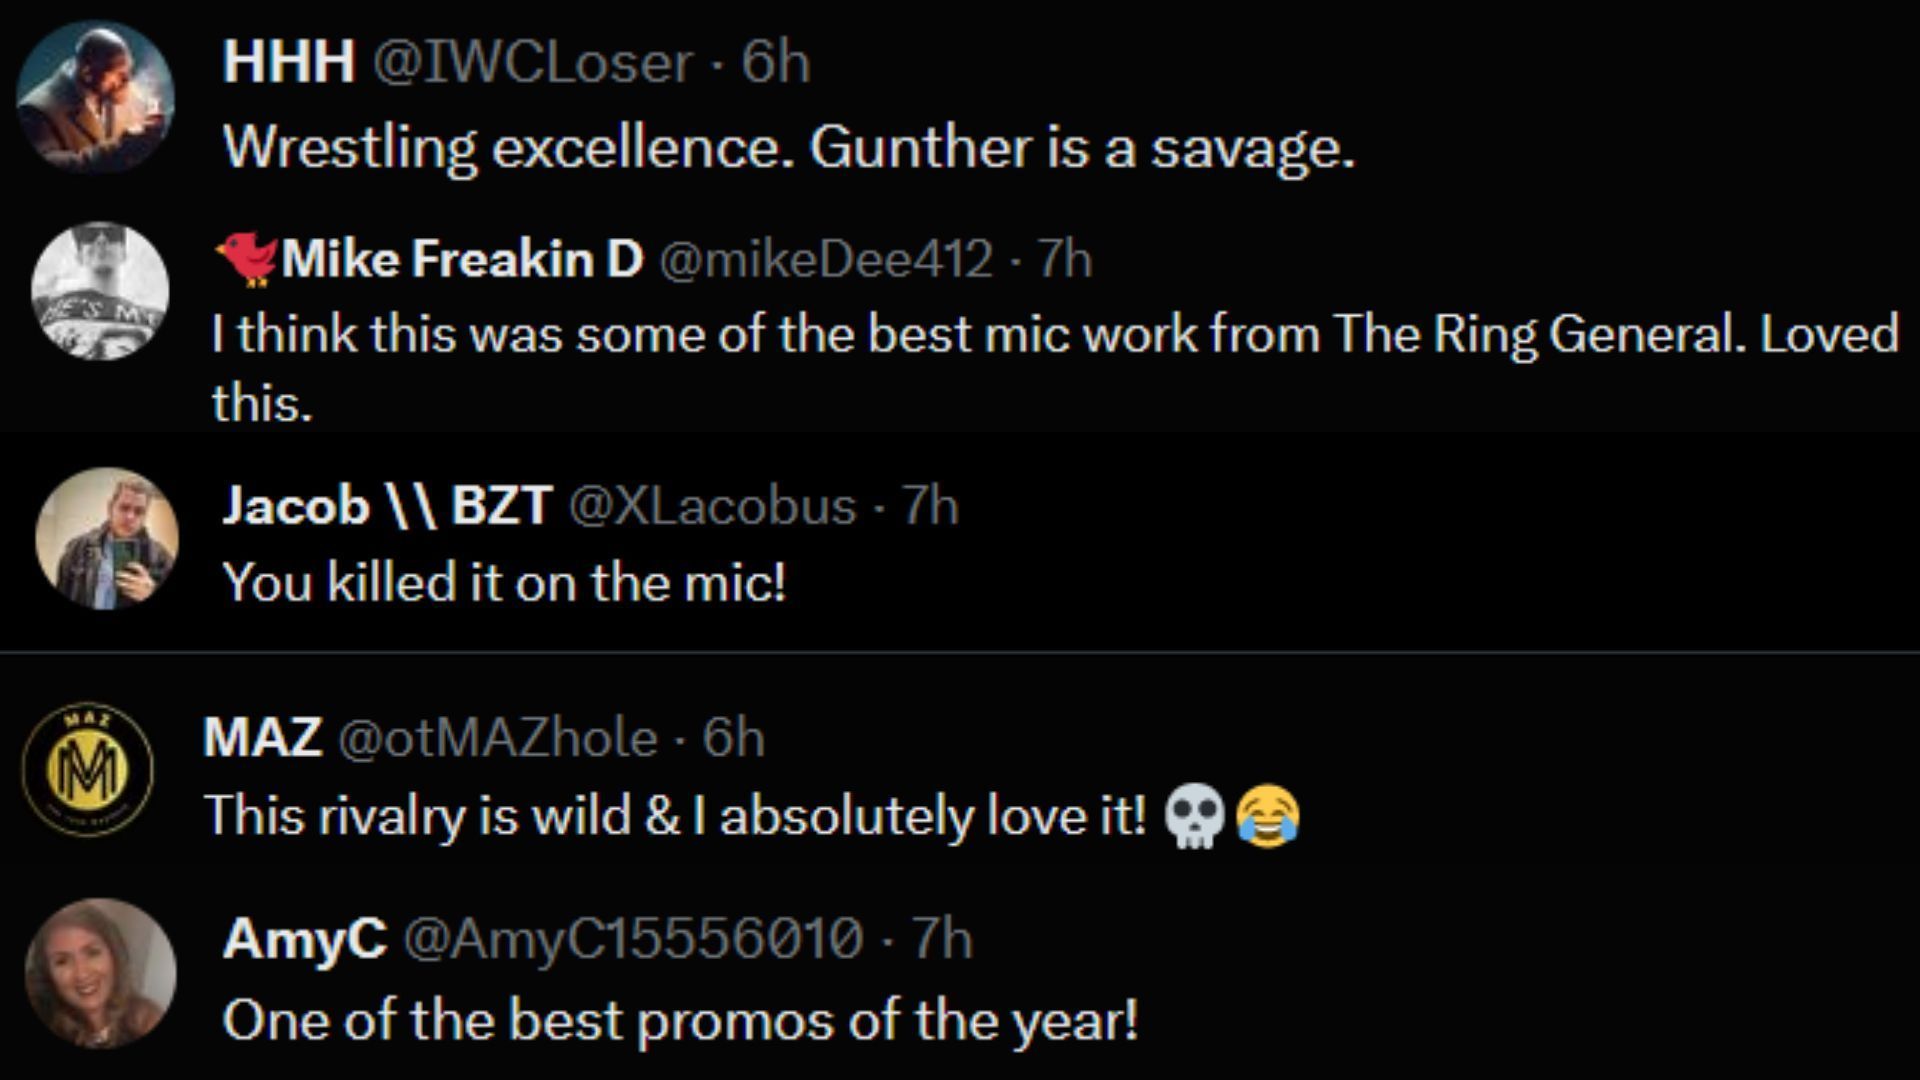 Fan reactions to the promo on Twitter